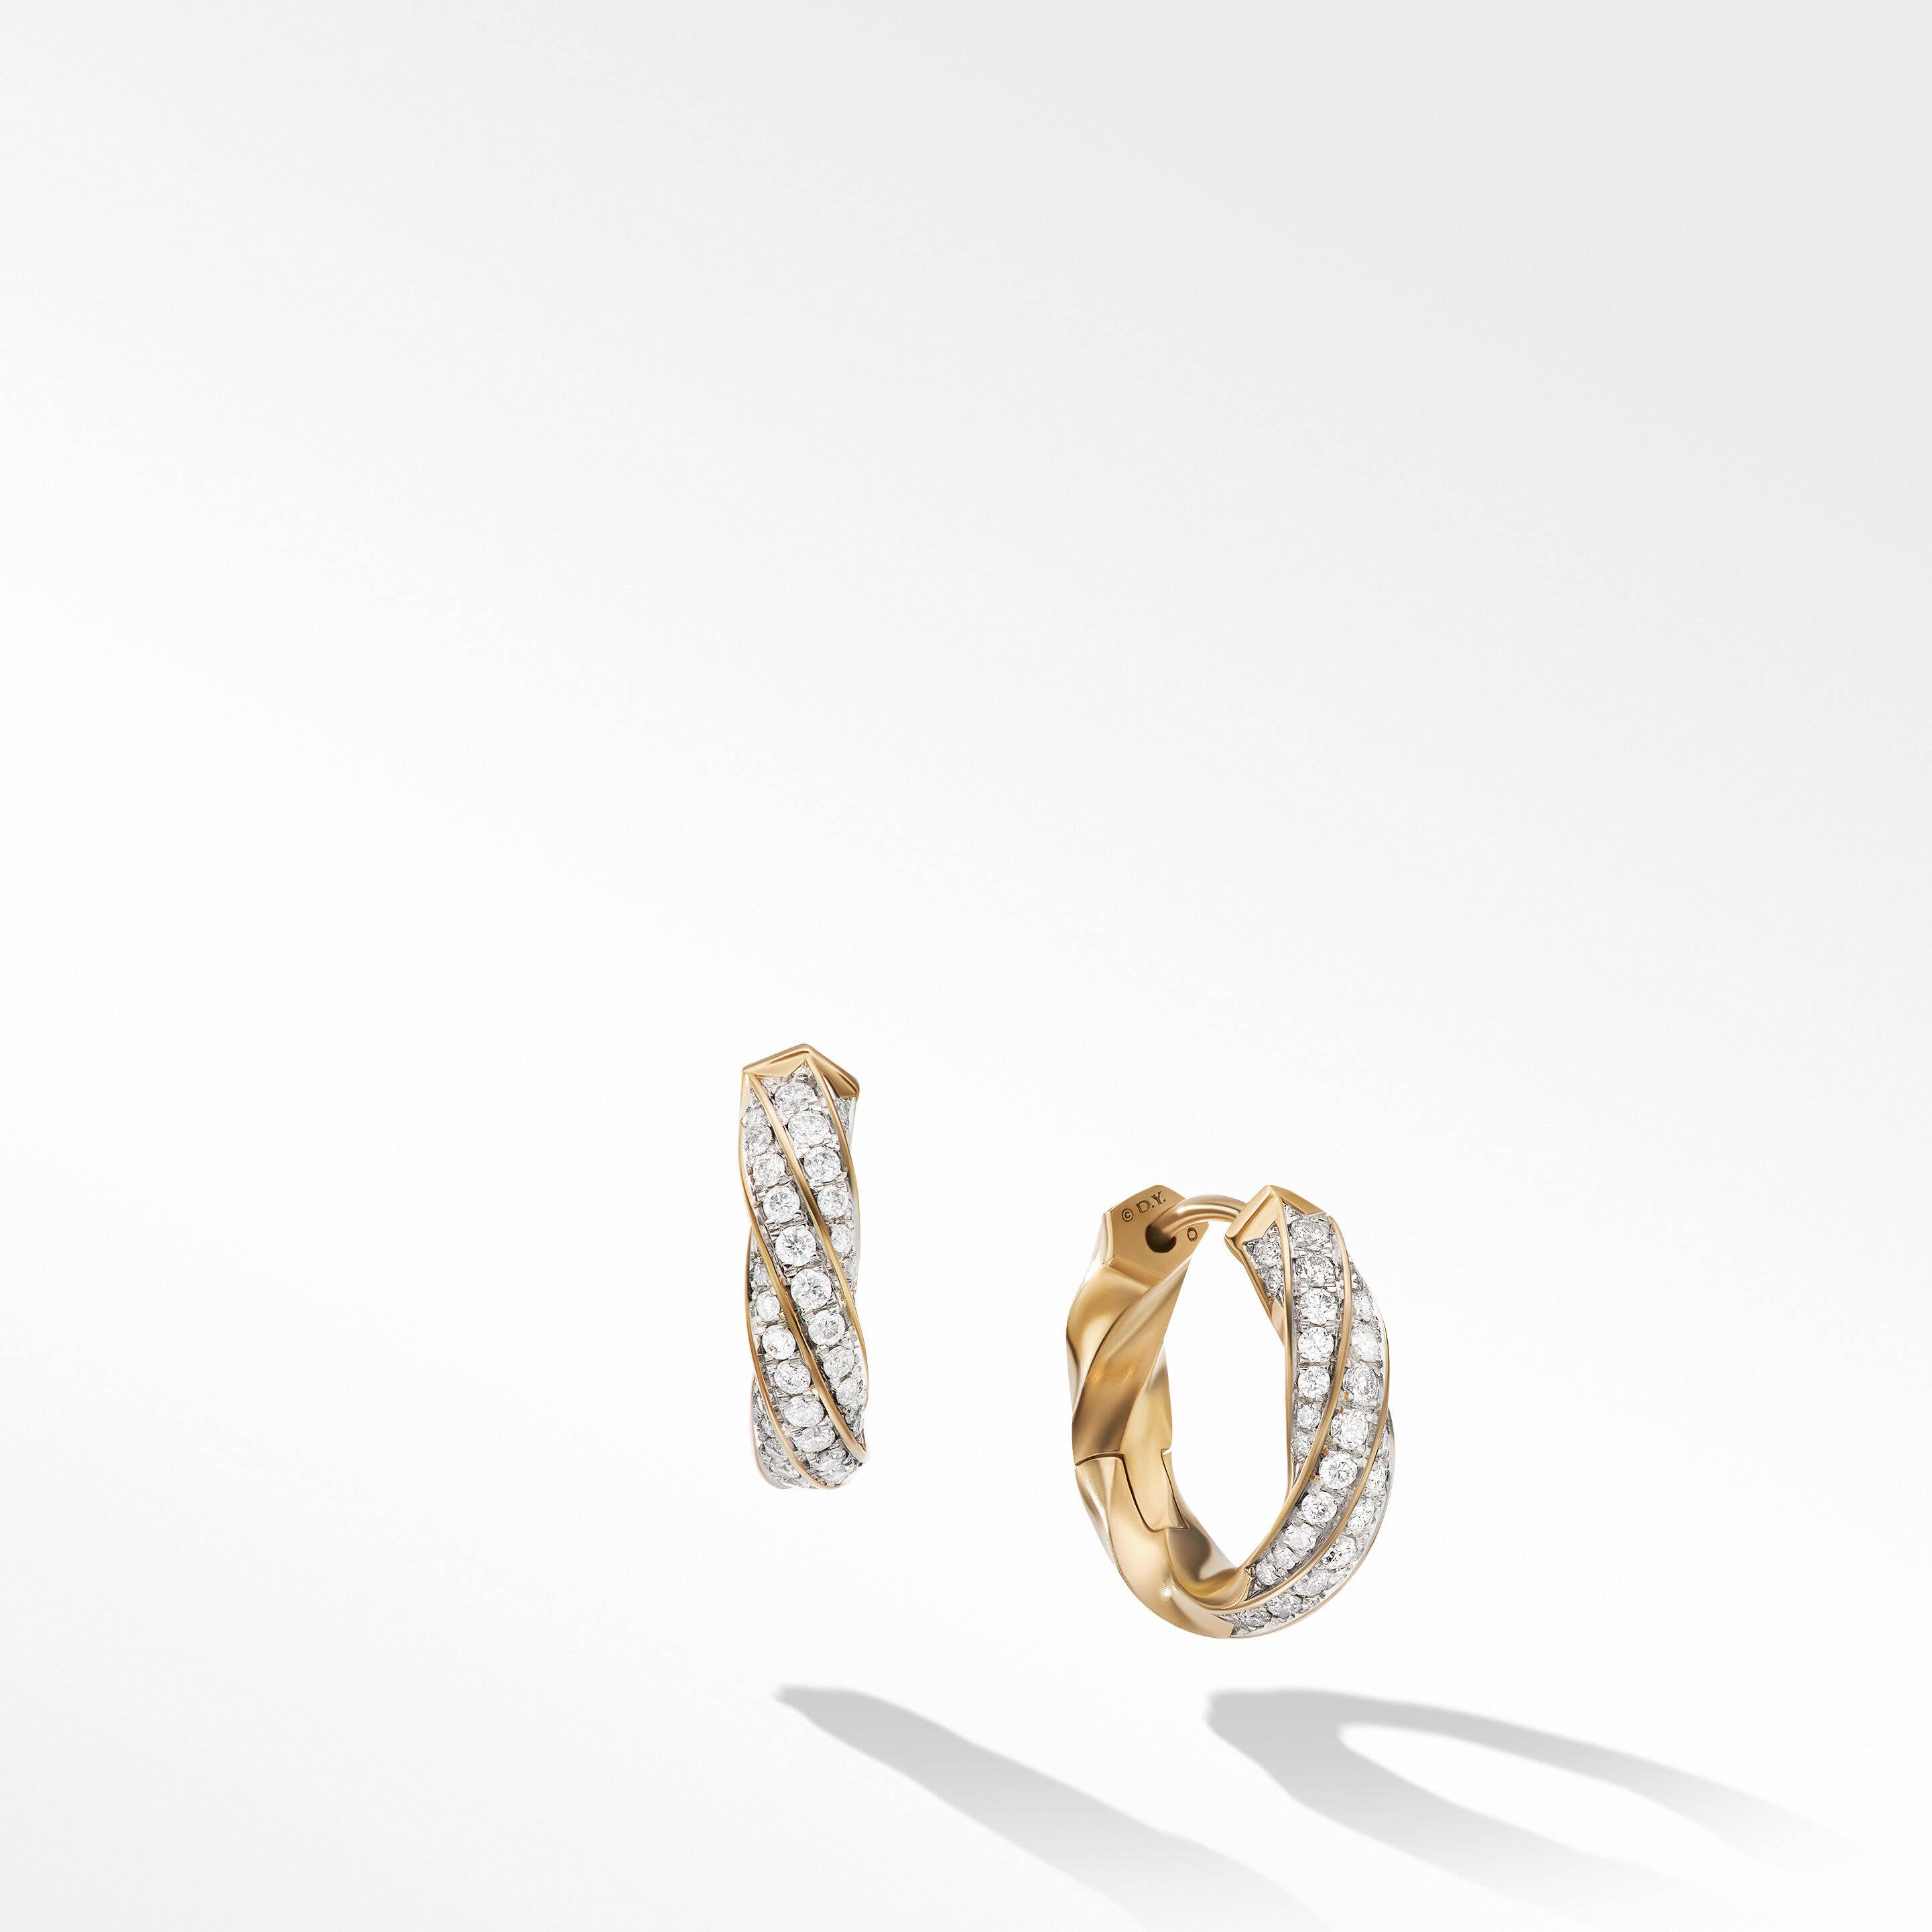 Cable Edge Huggie Hoop Earrings in Recycled 18K Yellow Gold with Diamonds, 13mm